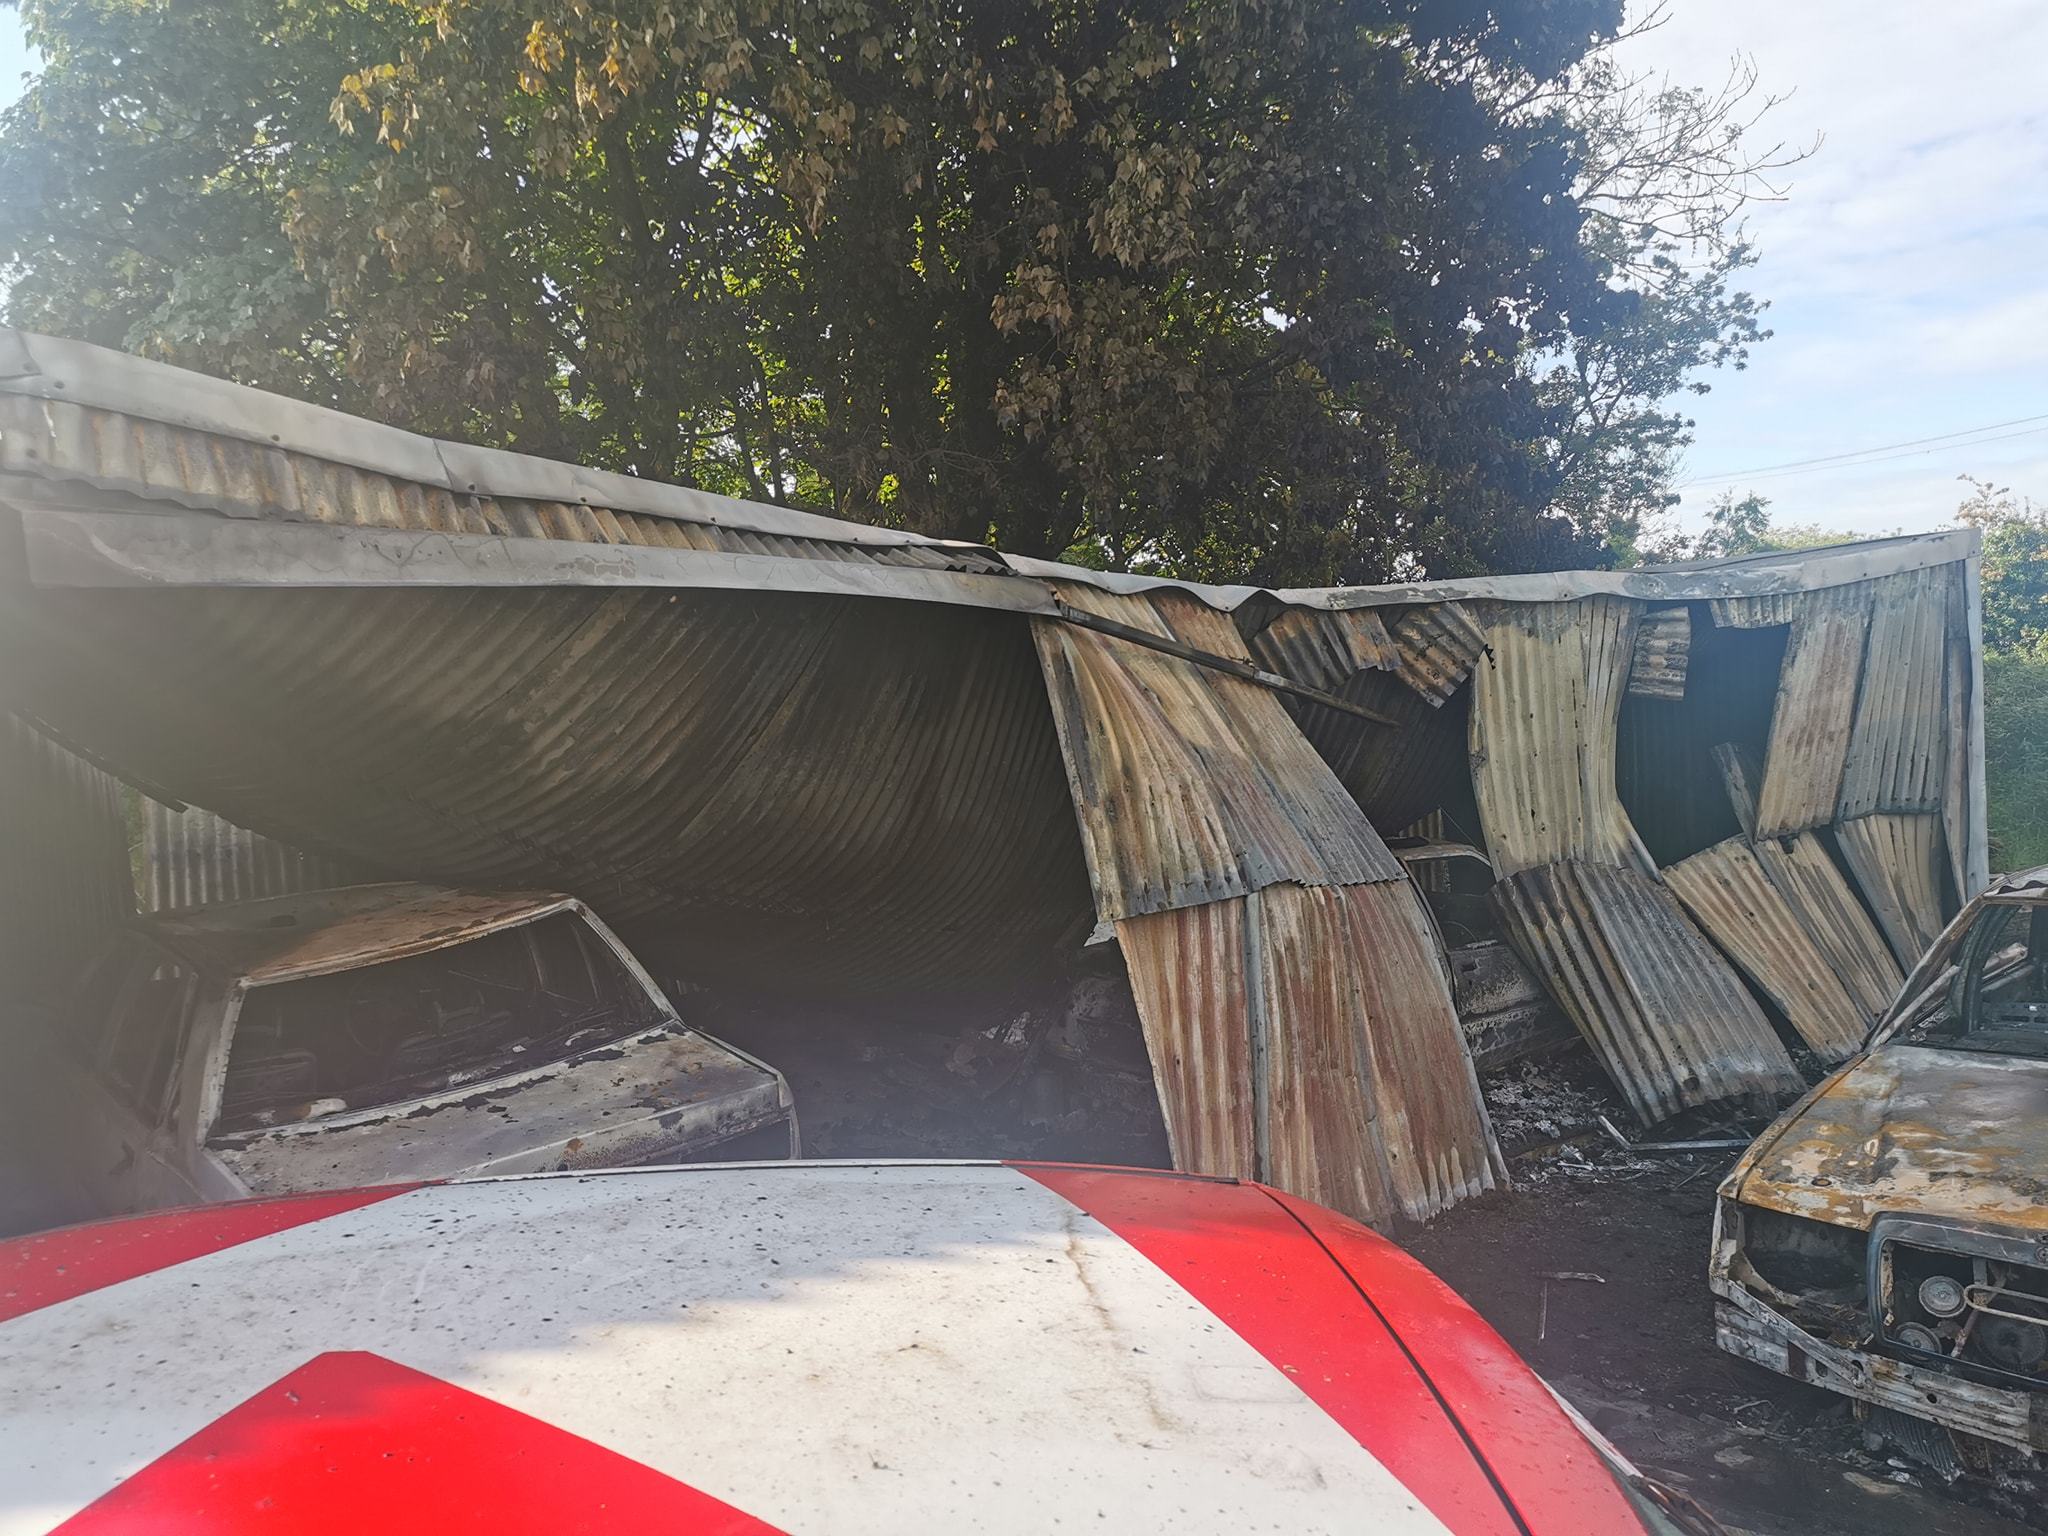 A number of vintage cars were destroyed in a shed fire in the Trillick area.